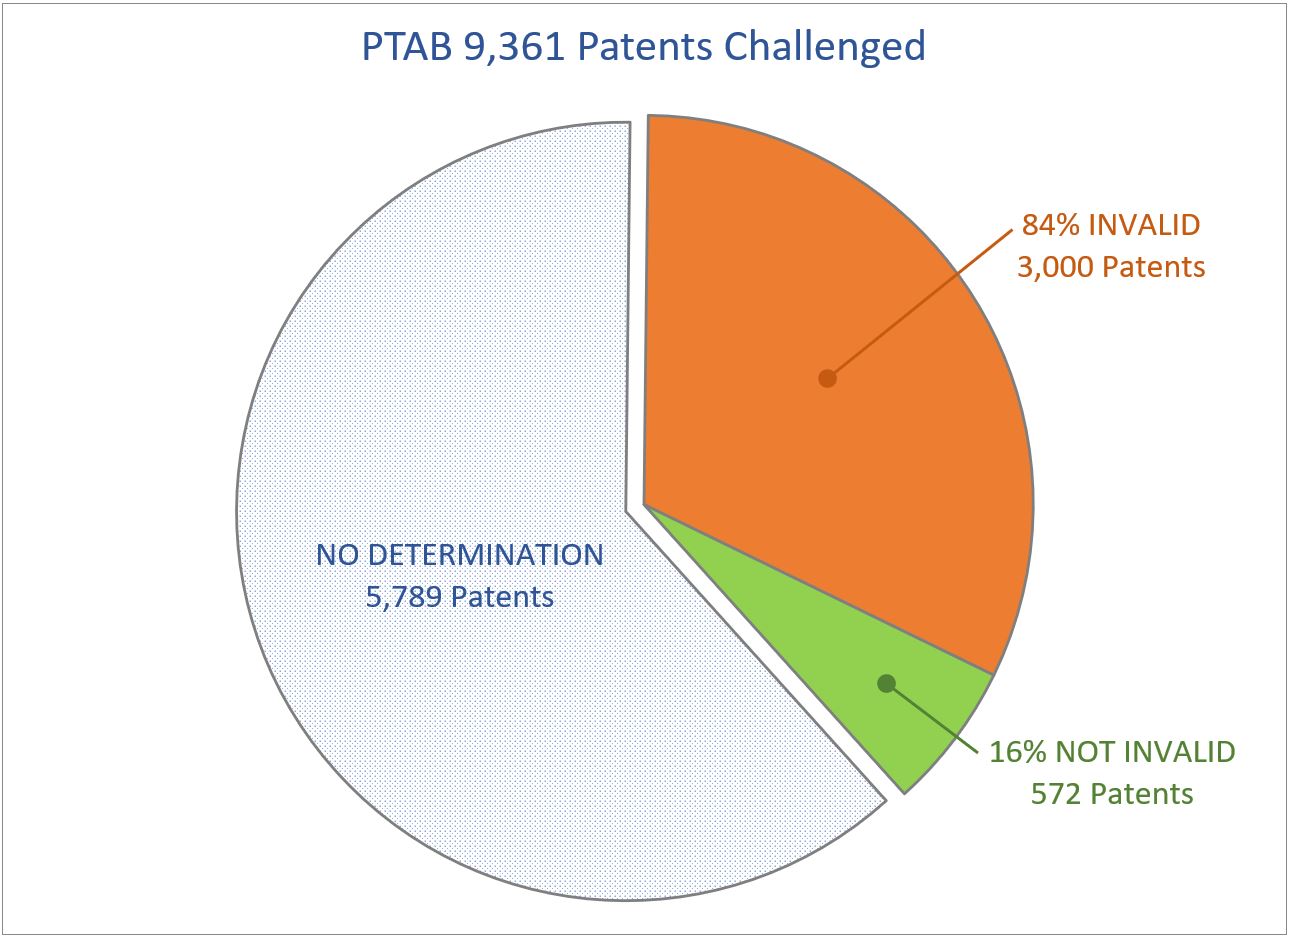 Assessing PTAB Invalidity Rates